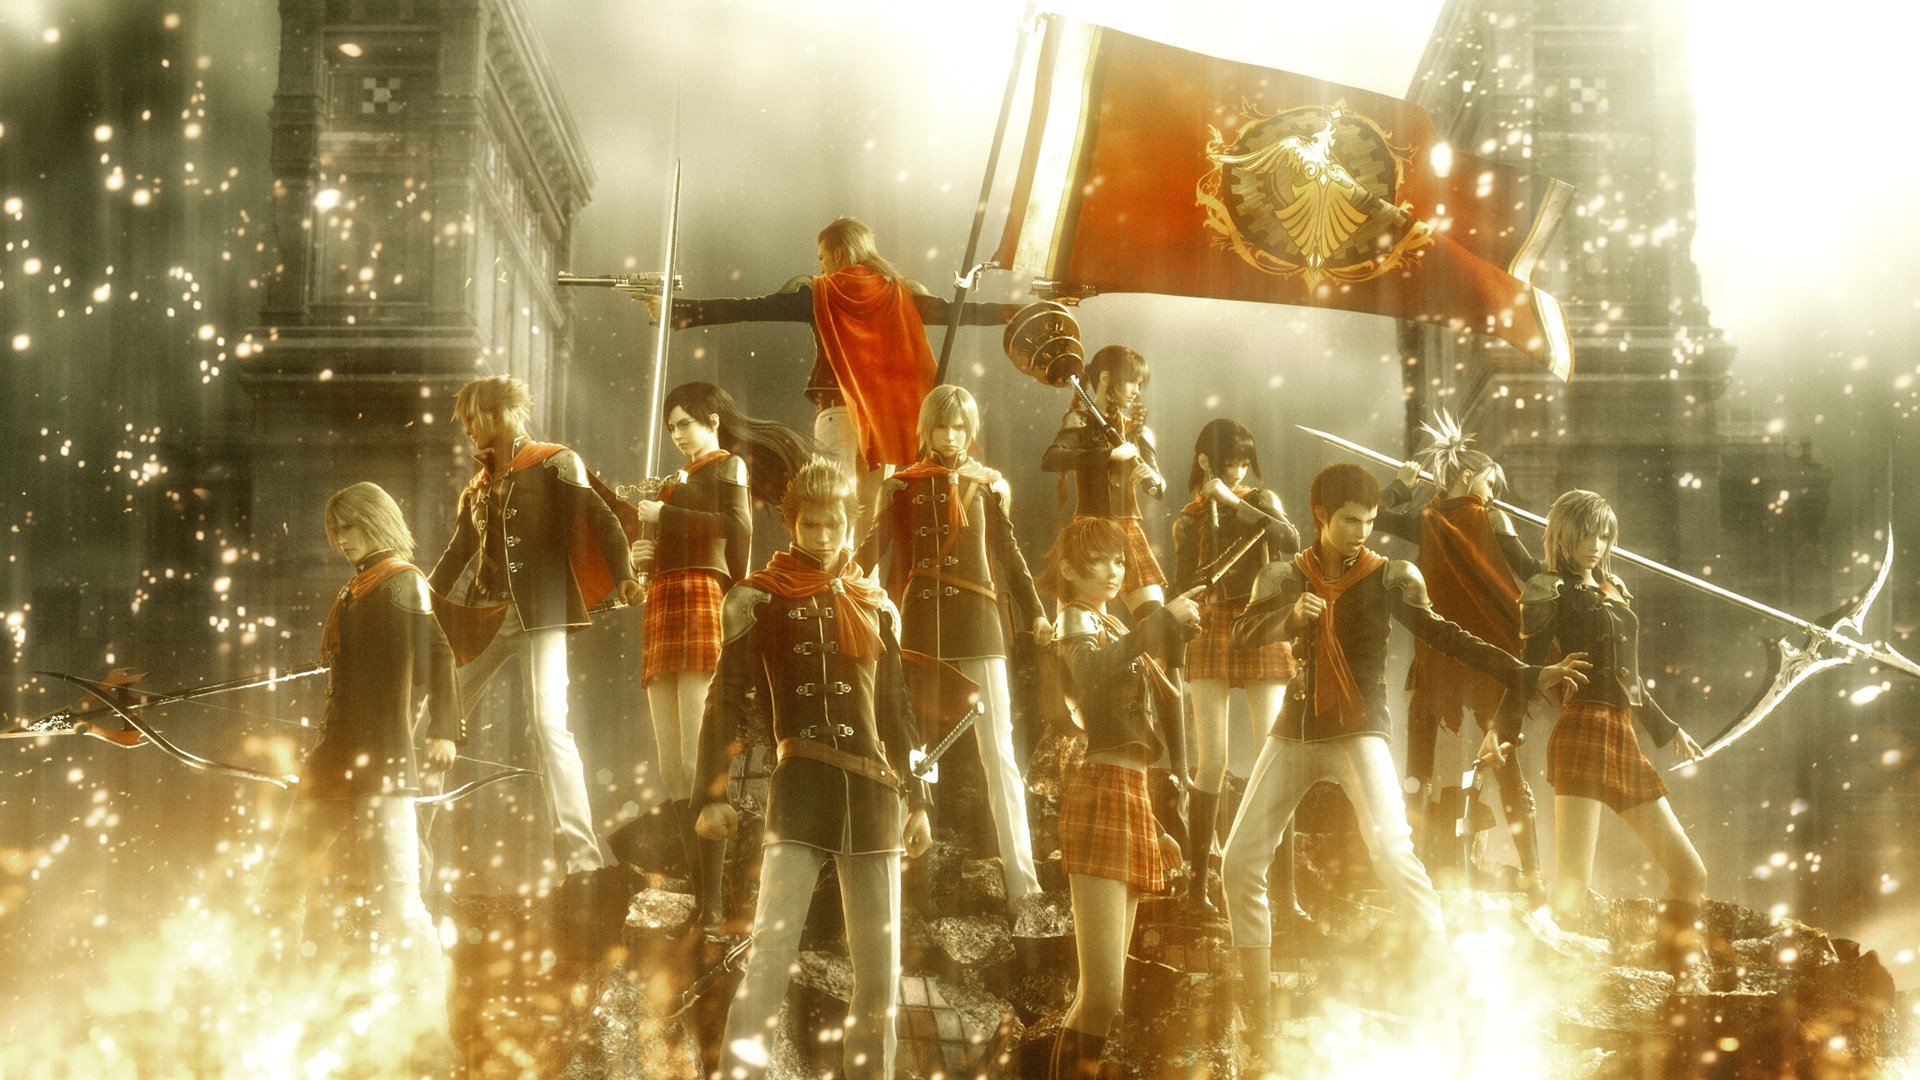 FINAL FANTASY TYPE-0™ HD cover image